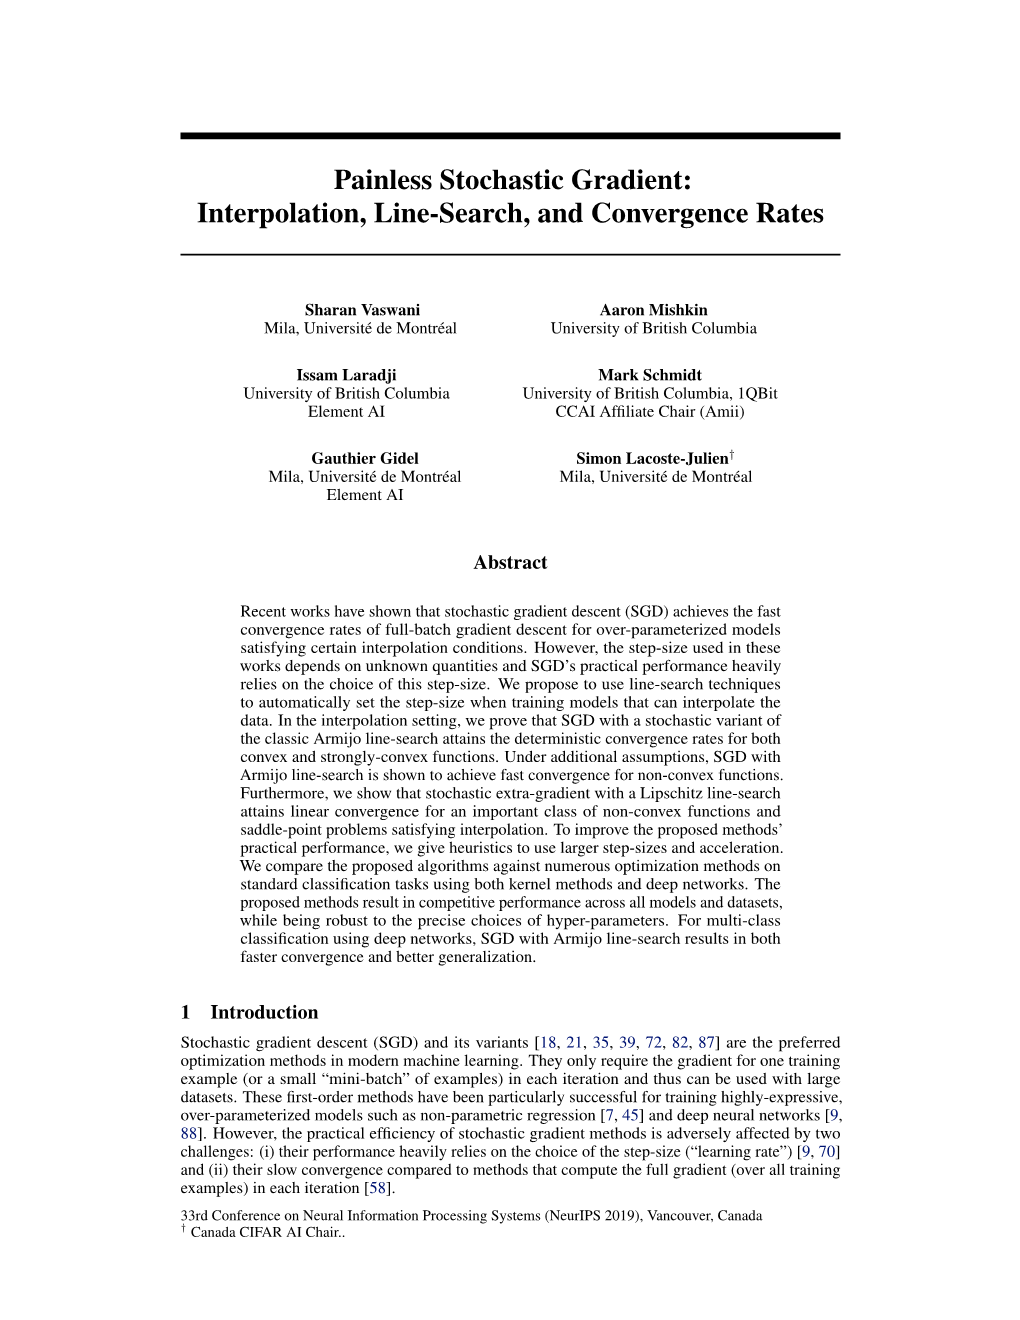 Painless Stochastic Gradient: Interpolation, Line-Search, and Convergence Rates